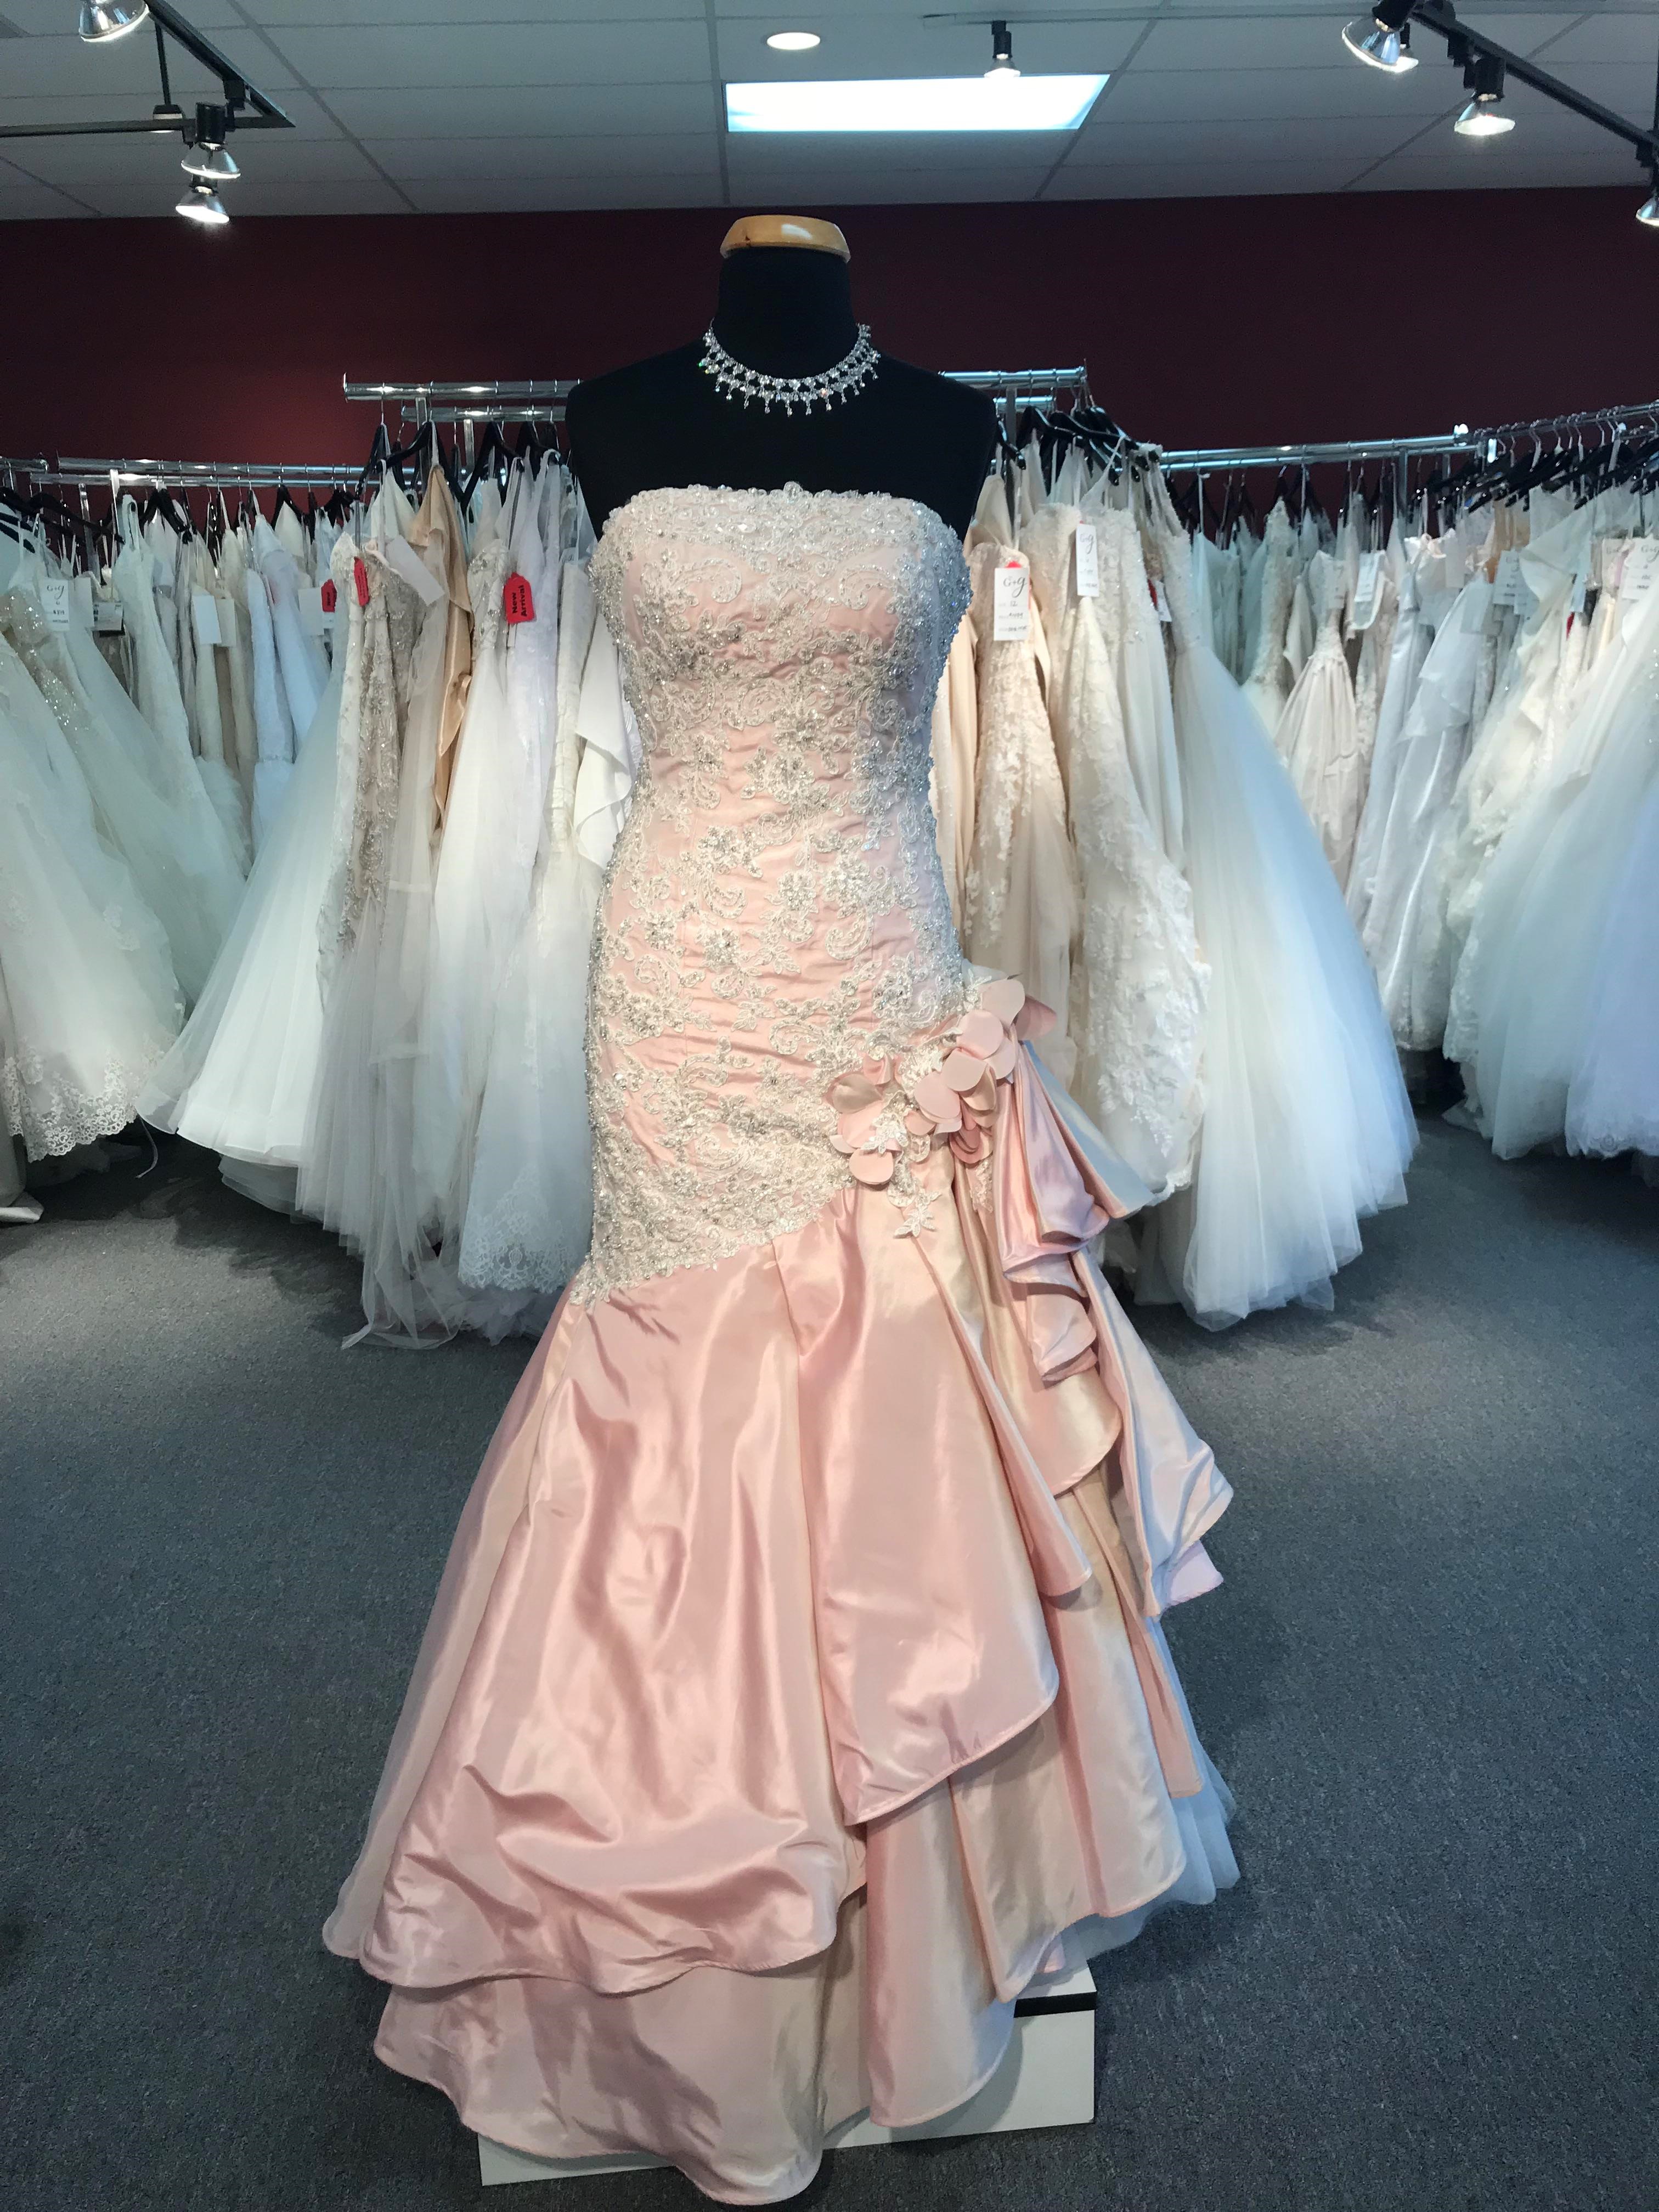 Think PINK! Pink Wedding Dresses Are on Trend for 2018!